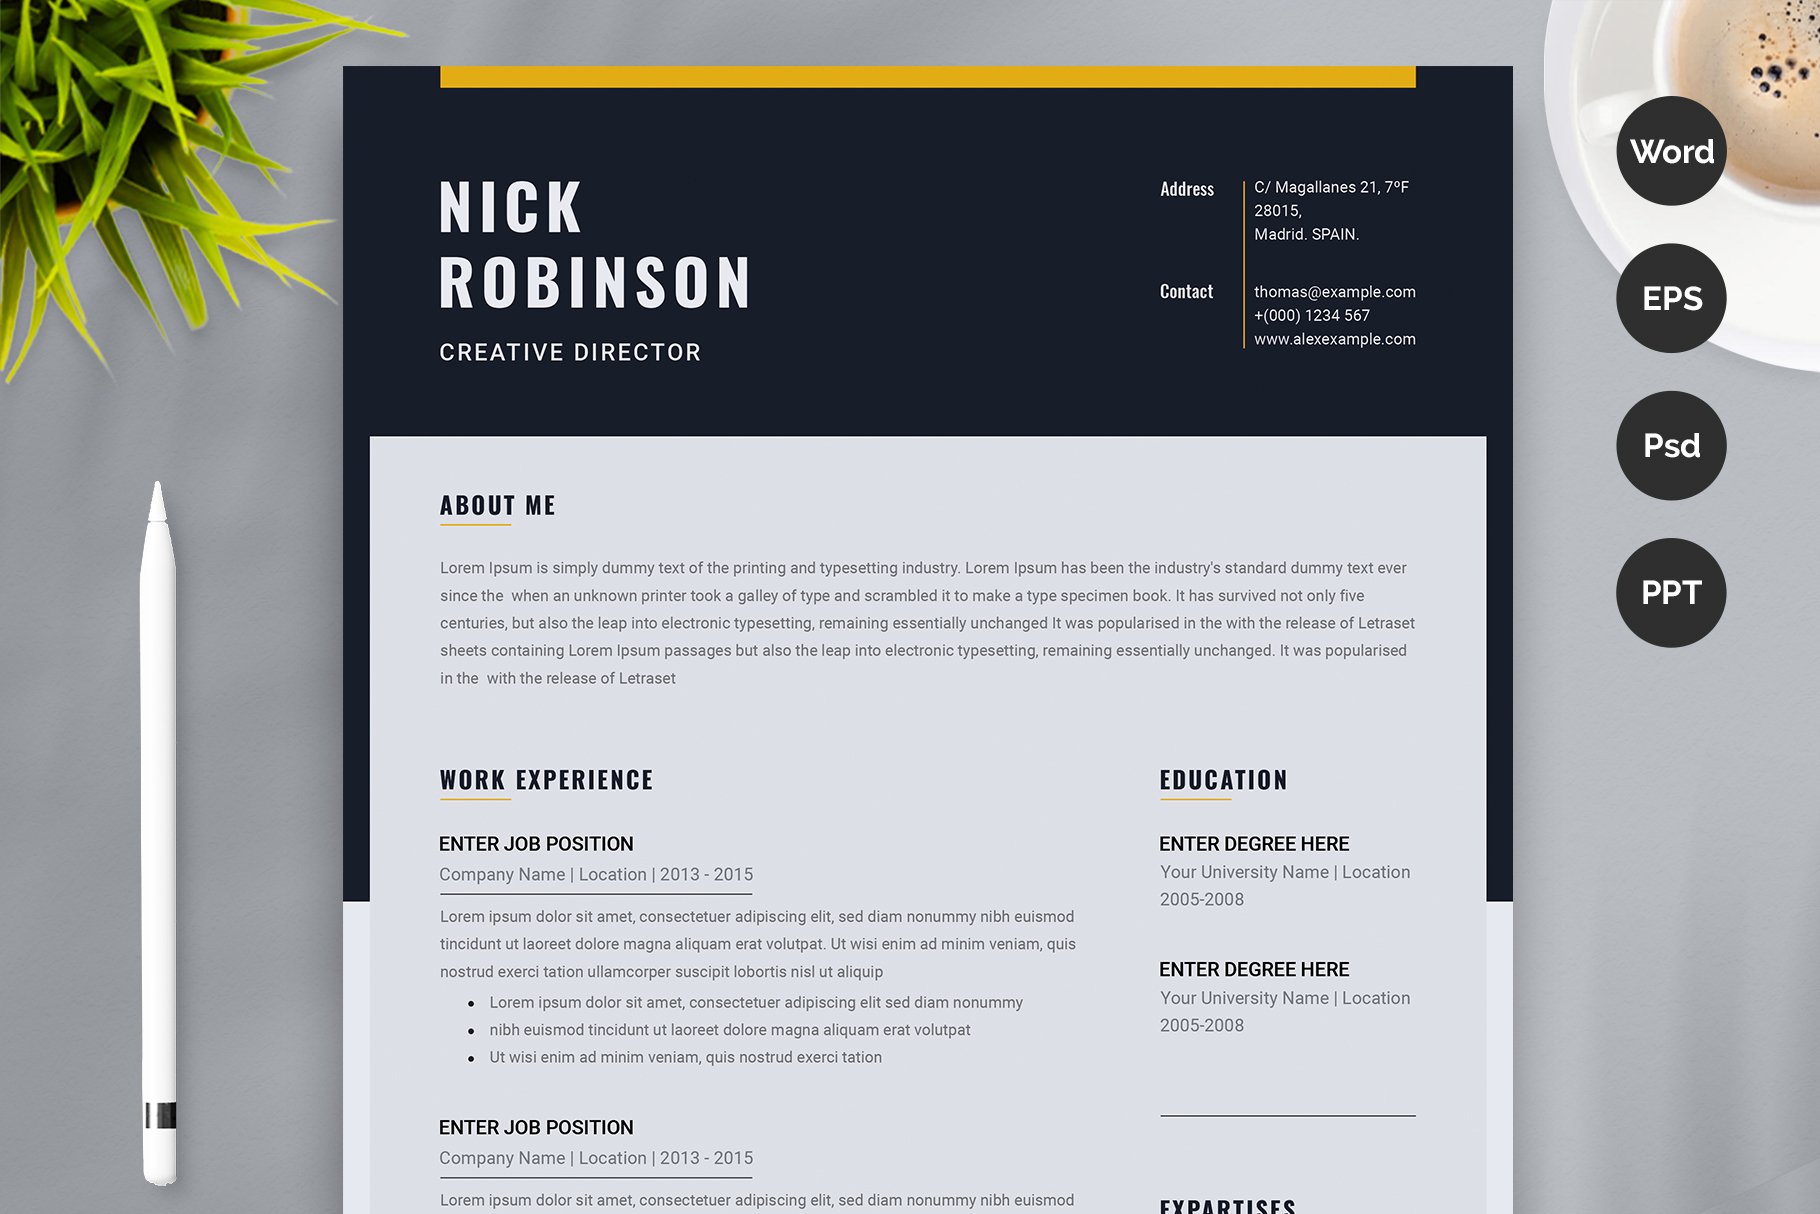 Clean Resume/CV cover image.